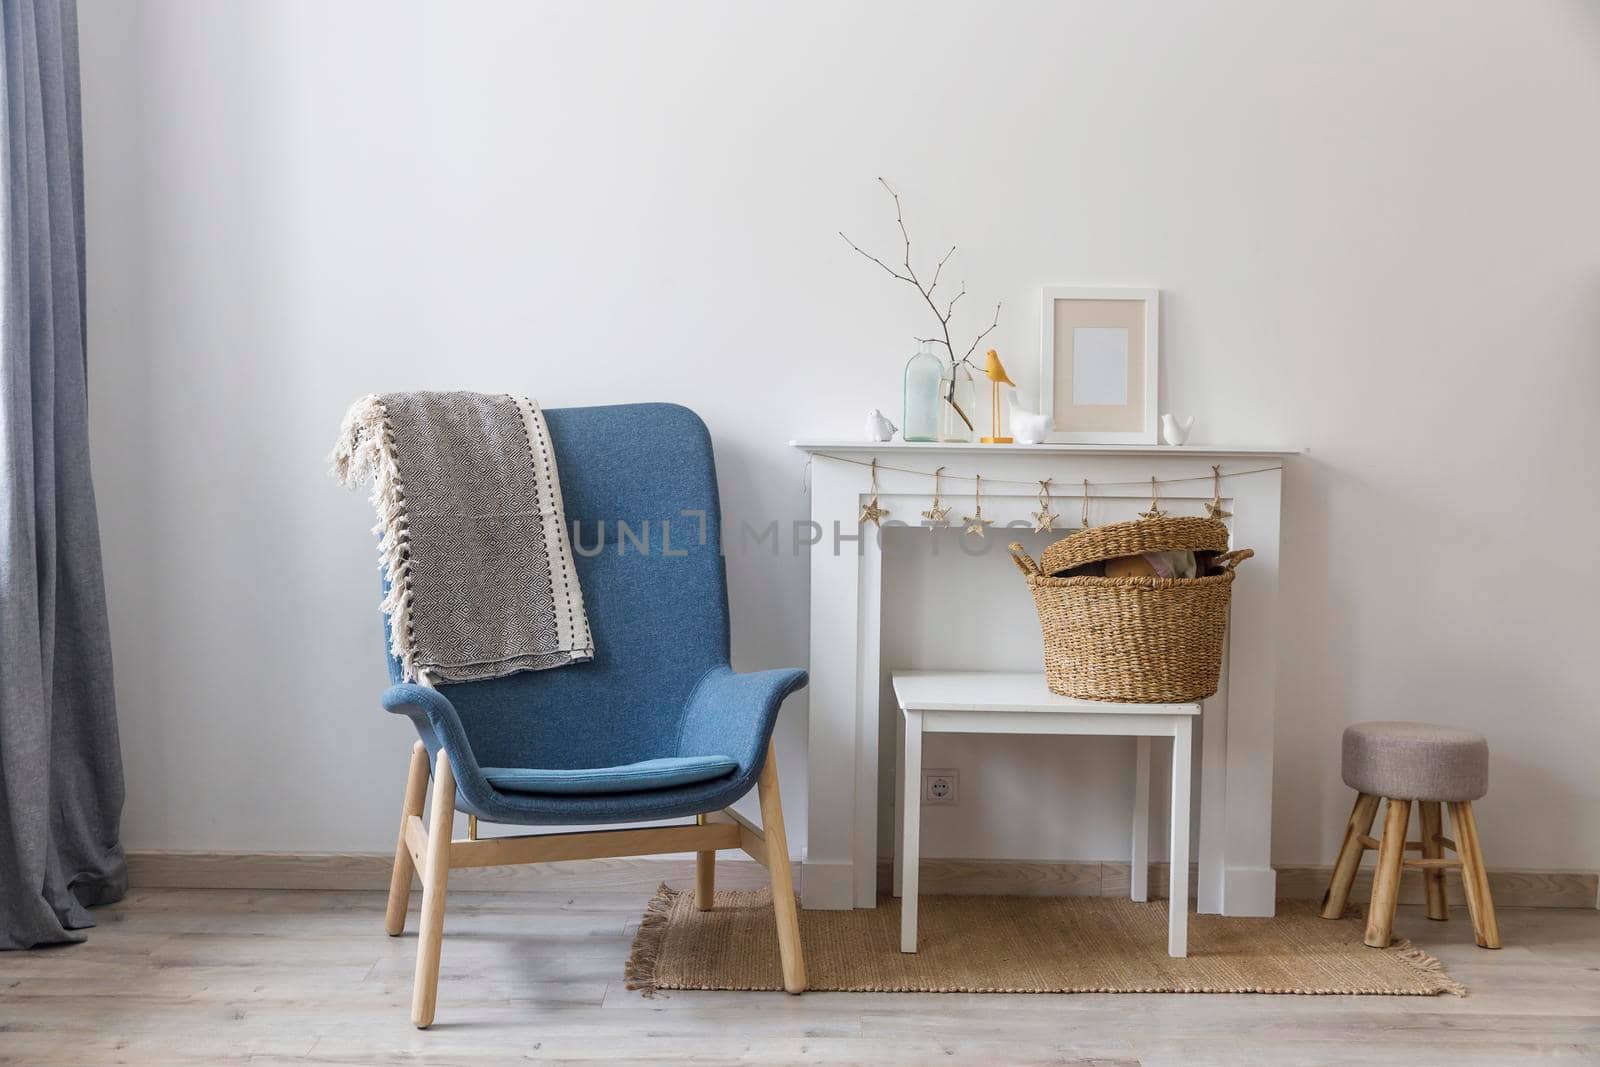 Fragment of the interior of a cozy house. A gray armchair by a white fireplace. On the fireplace is a glass bottle with a branch, figurines of birds and a photo frame. Place for text by elenarostunova